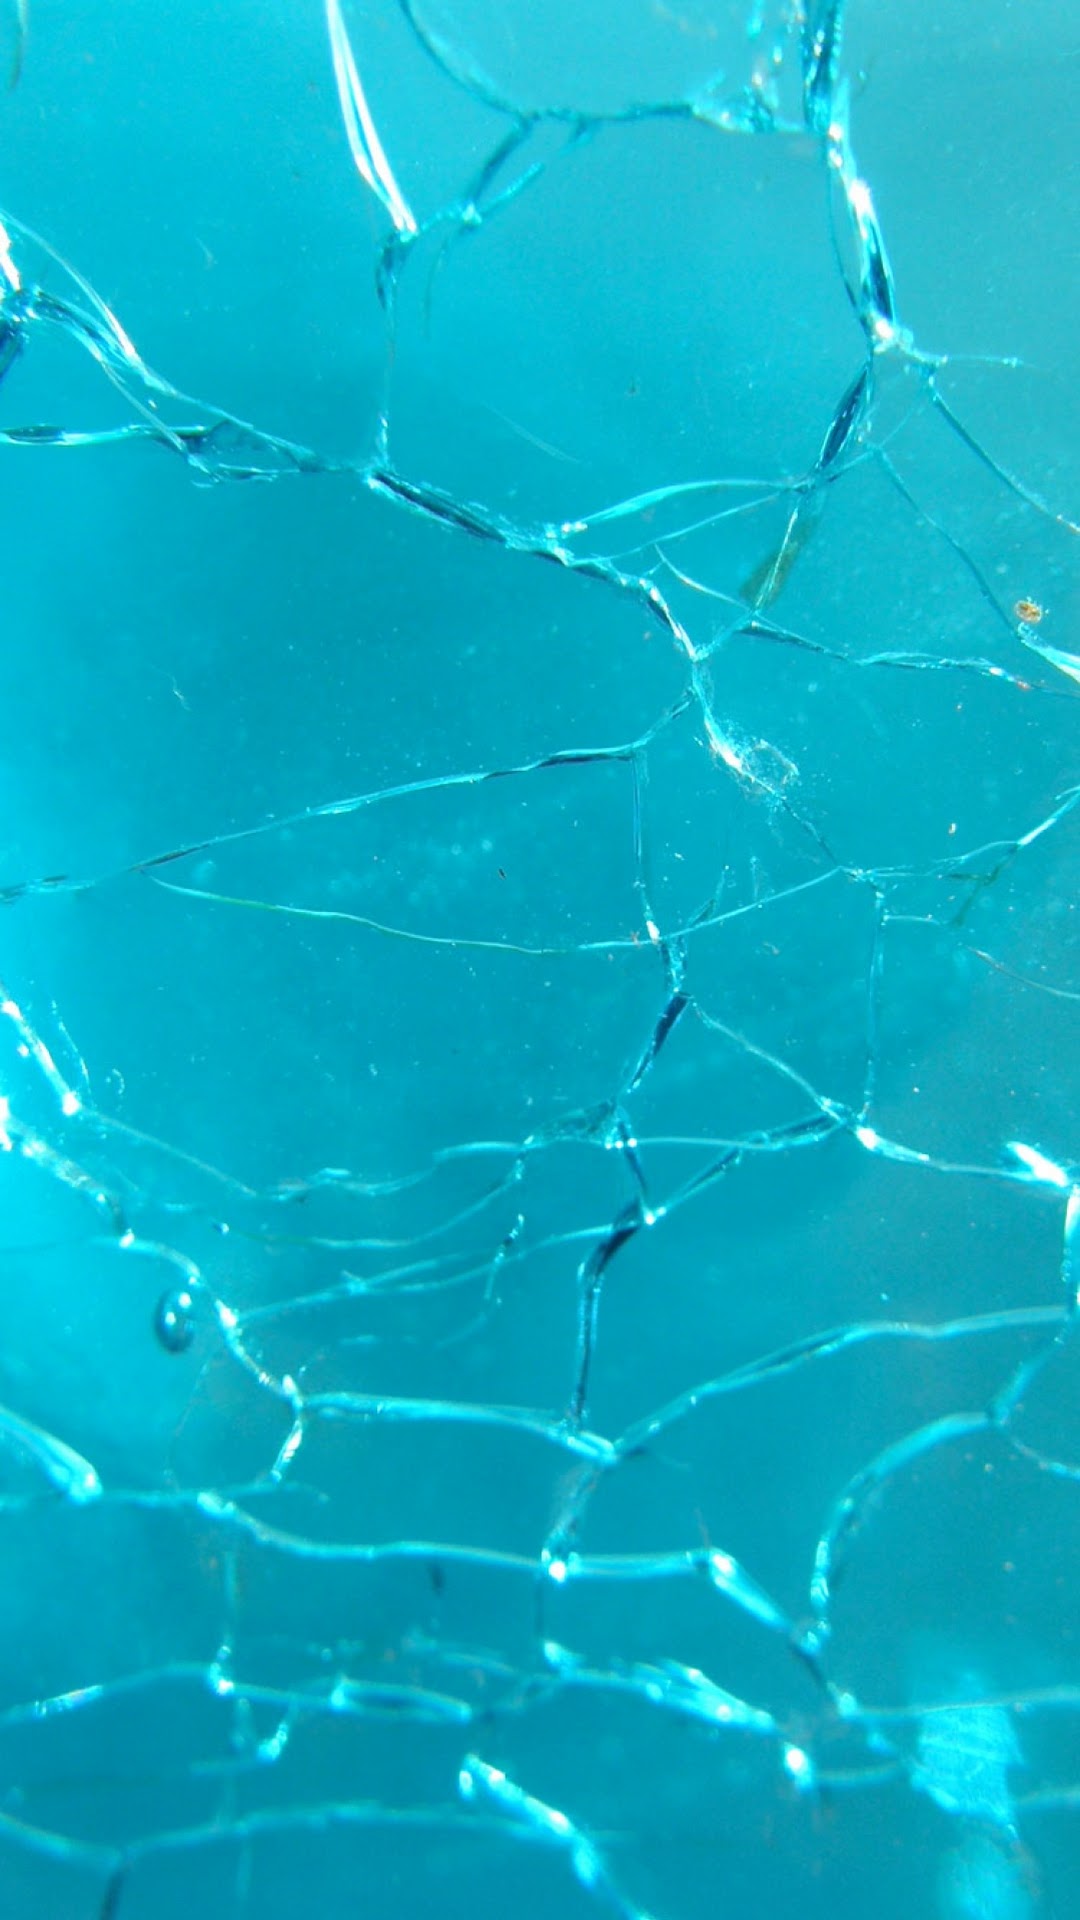 Hd Cracked Screen Wallpaper For Android - Home Screen Android Wallpaper Gallery - HD Wallpaper 